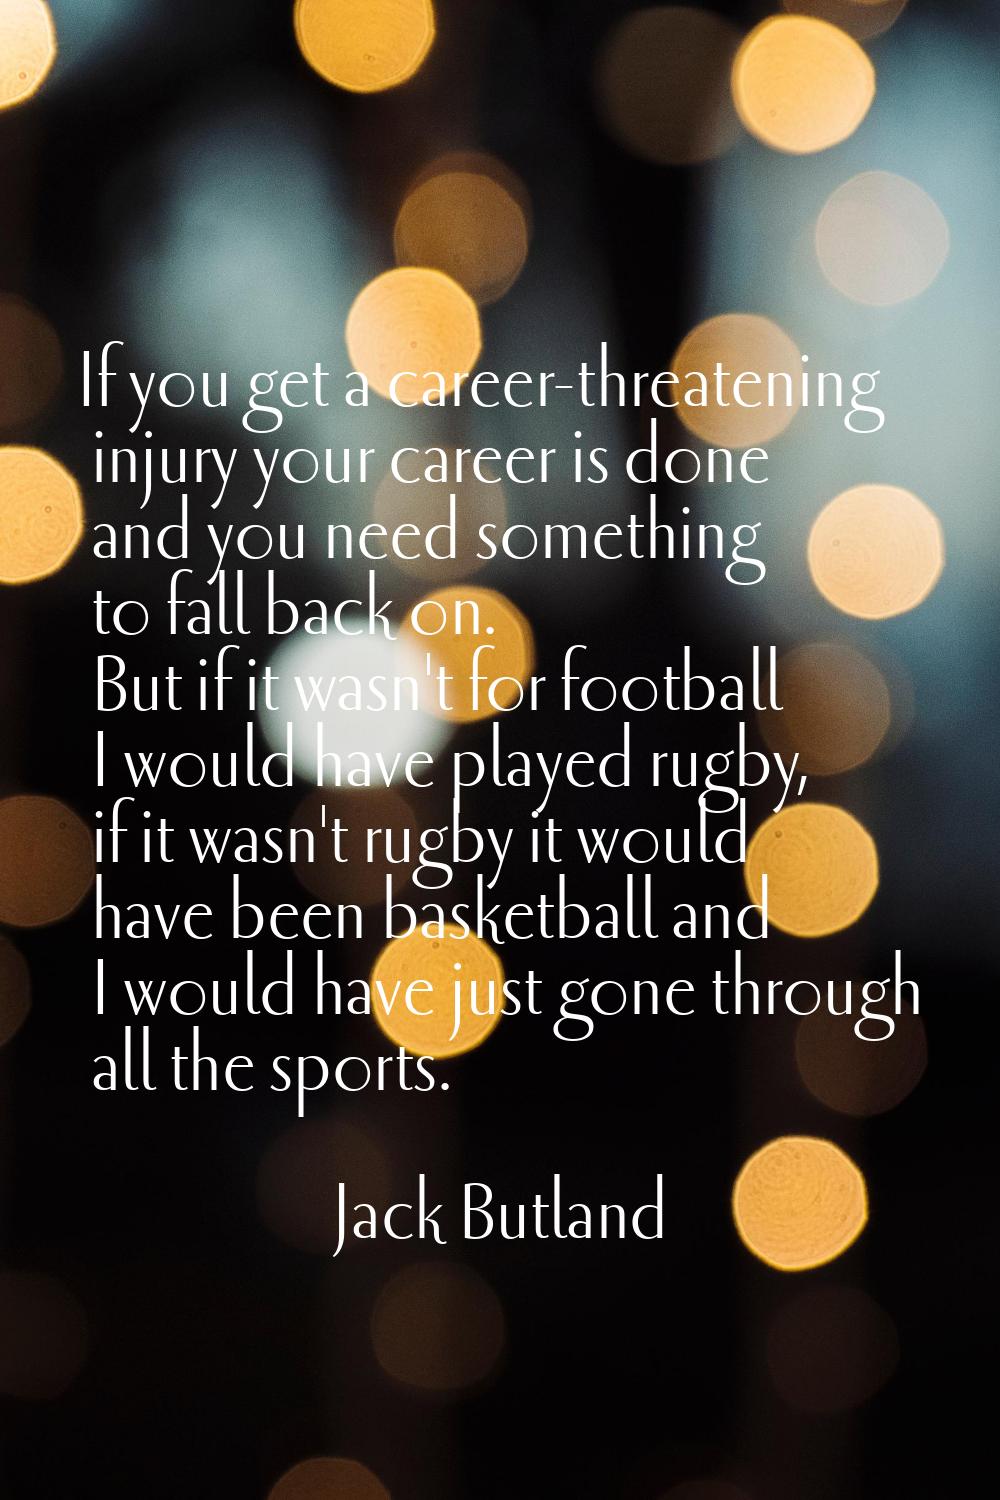 If you get a career-threatening injury your career is done and you need something to fall back on. 